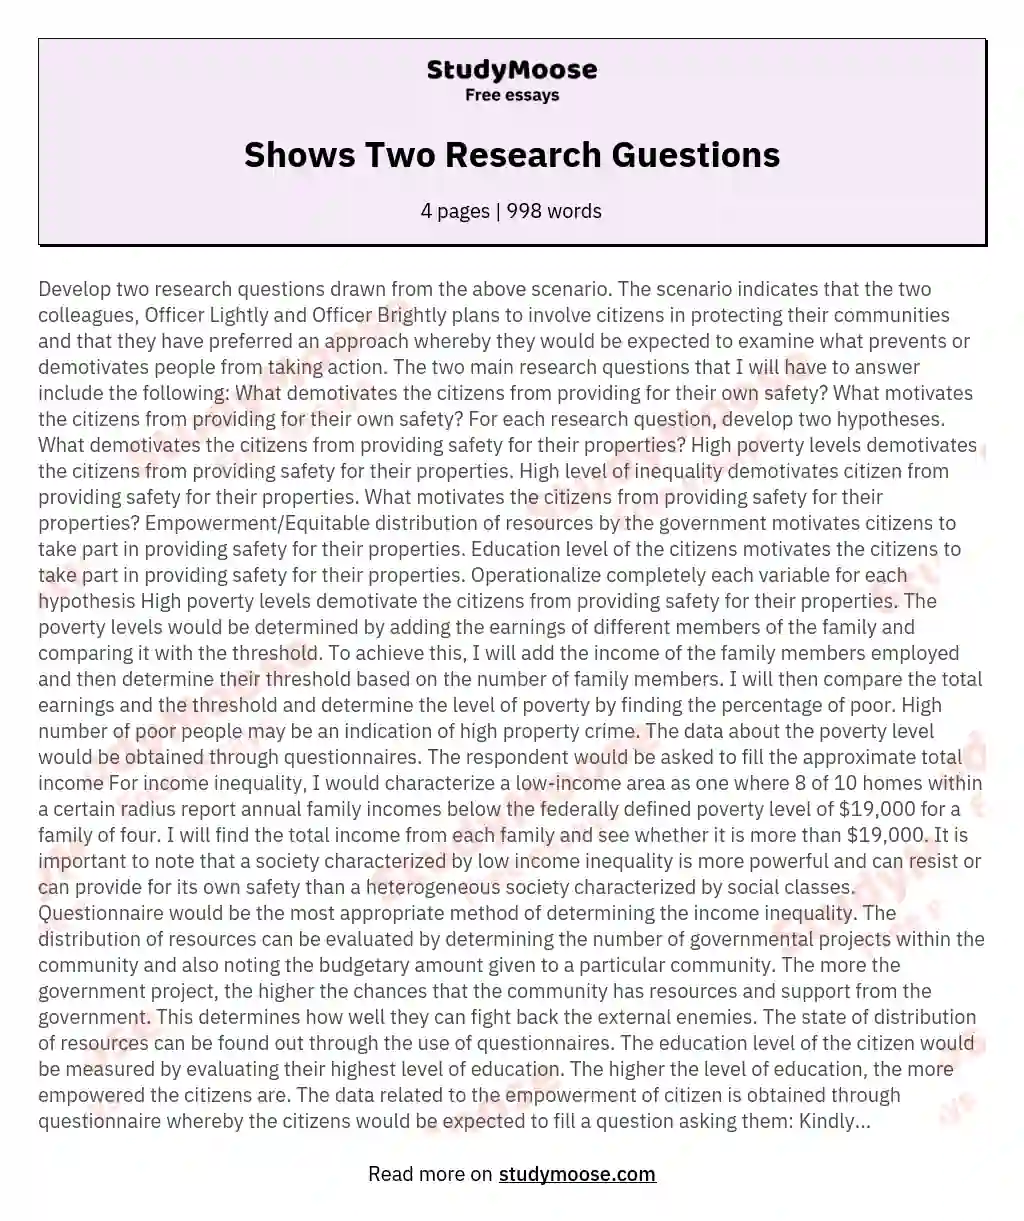 Shows Two Research Guestions essay